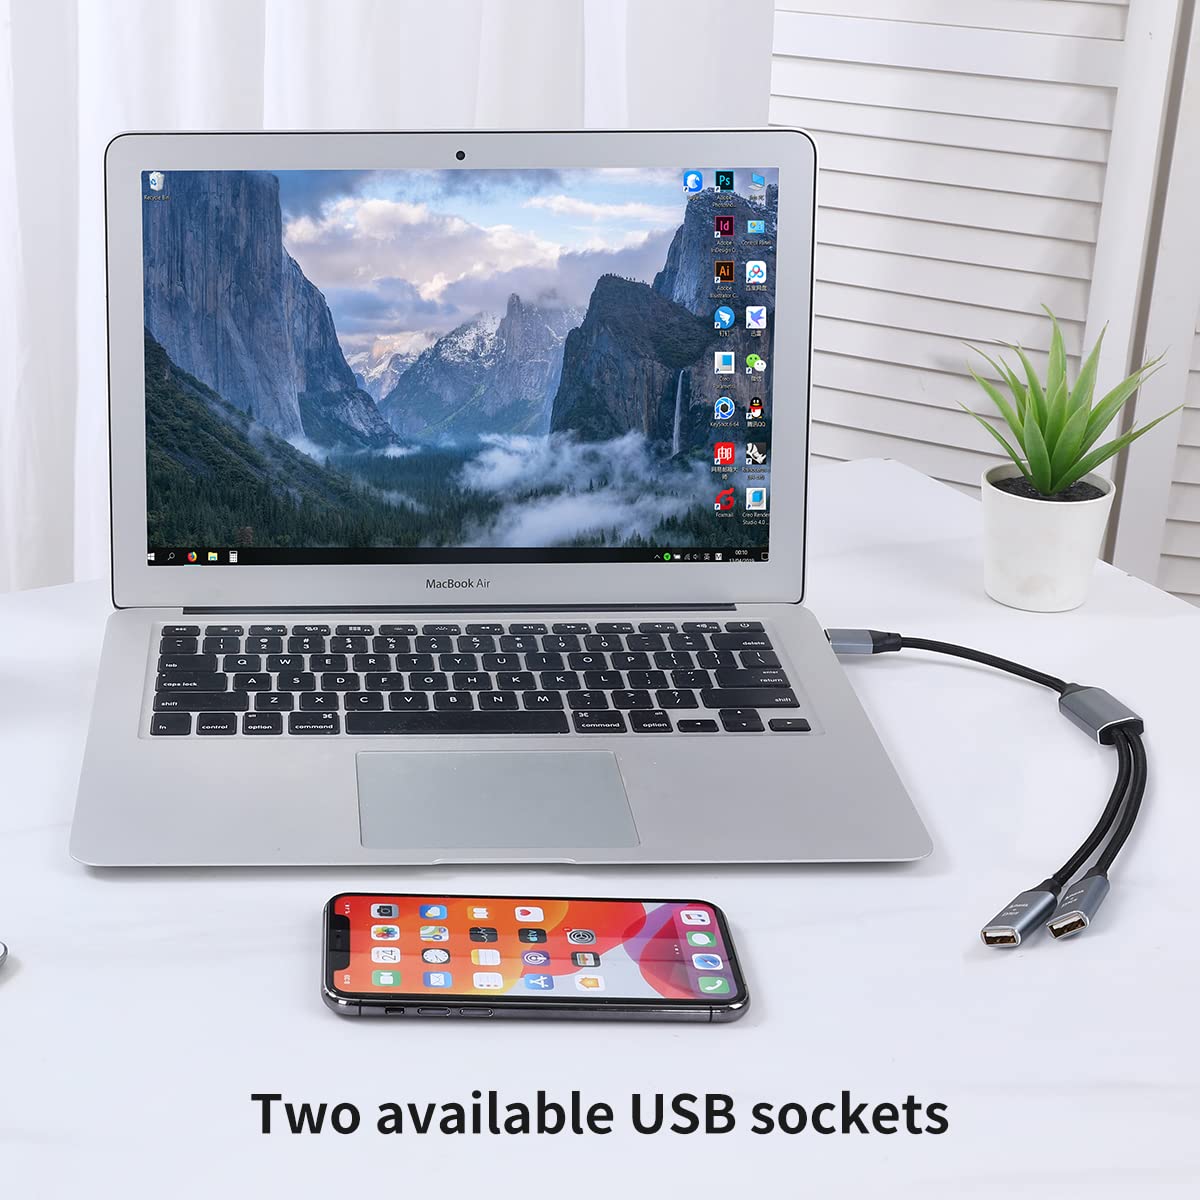 belipro USB 3.0 Splitter Y Cable 3Ft, USB 1 Male to 2 Female Connector, Data and Charger Power Splitter Adapter for Mac, Laptop, Printer, and More USB-Enabled Devices.Grey